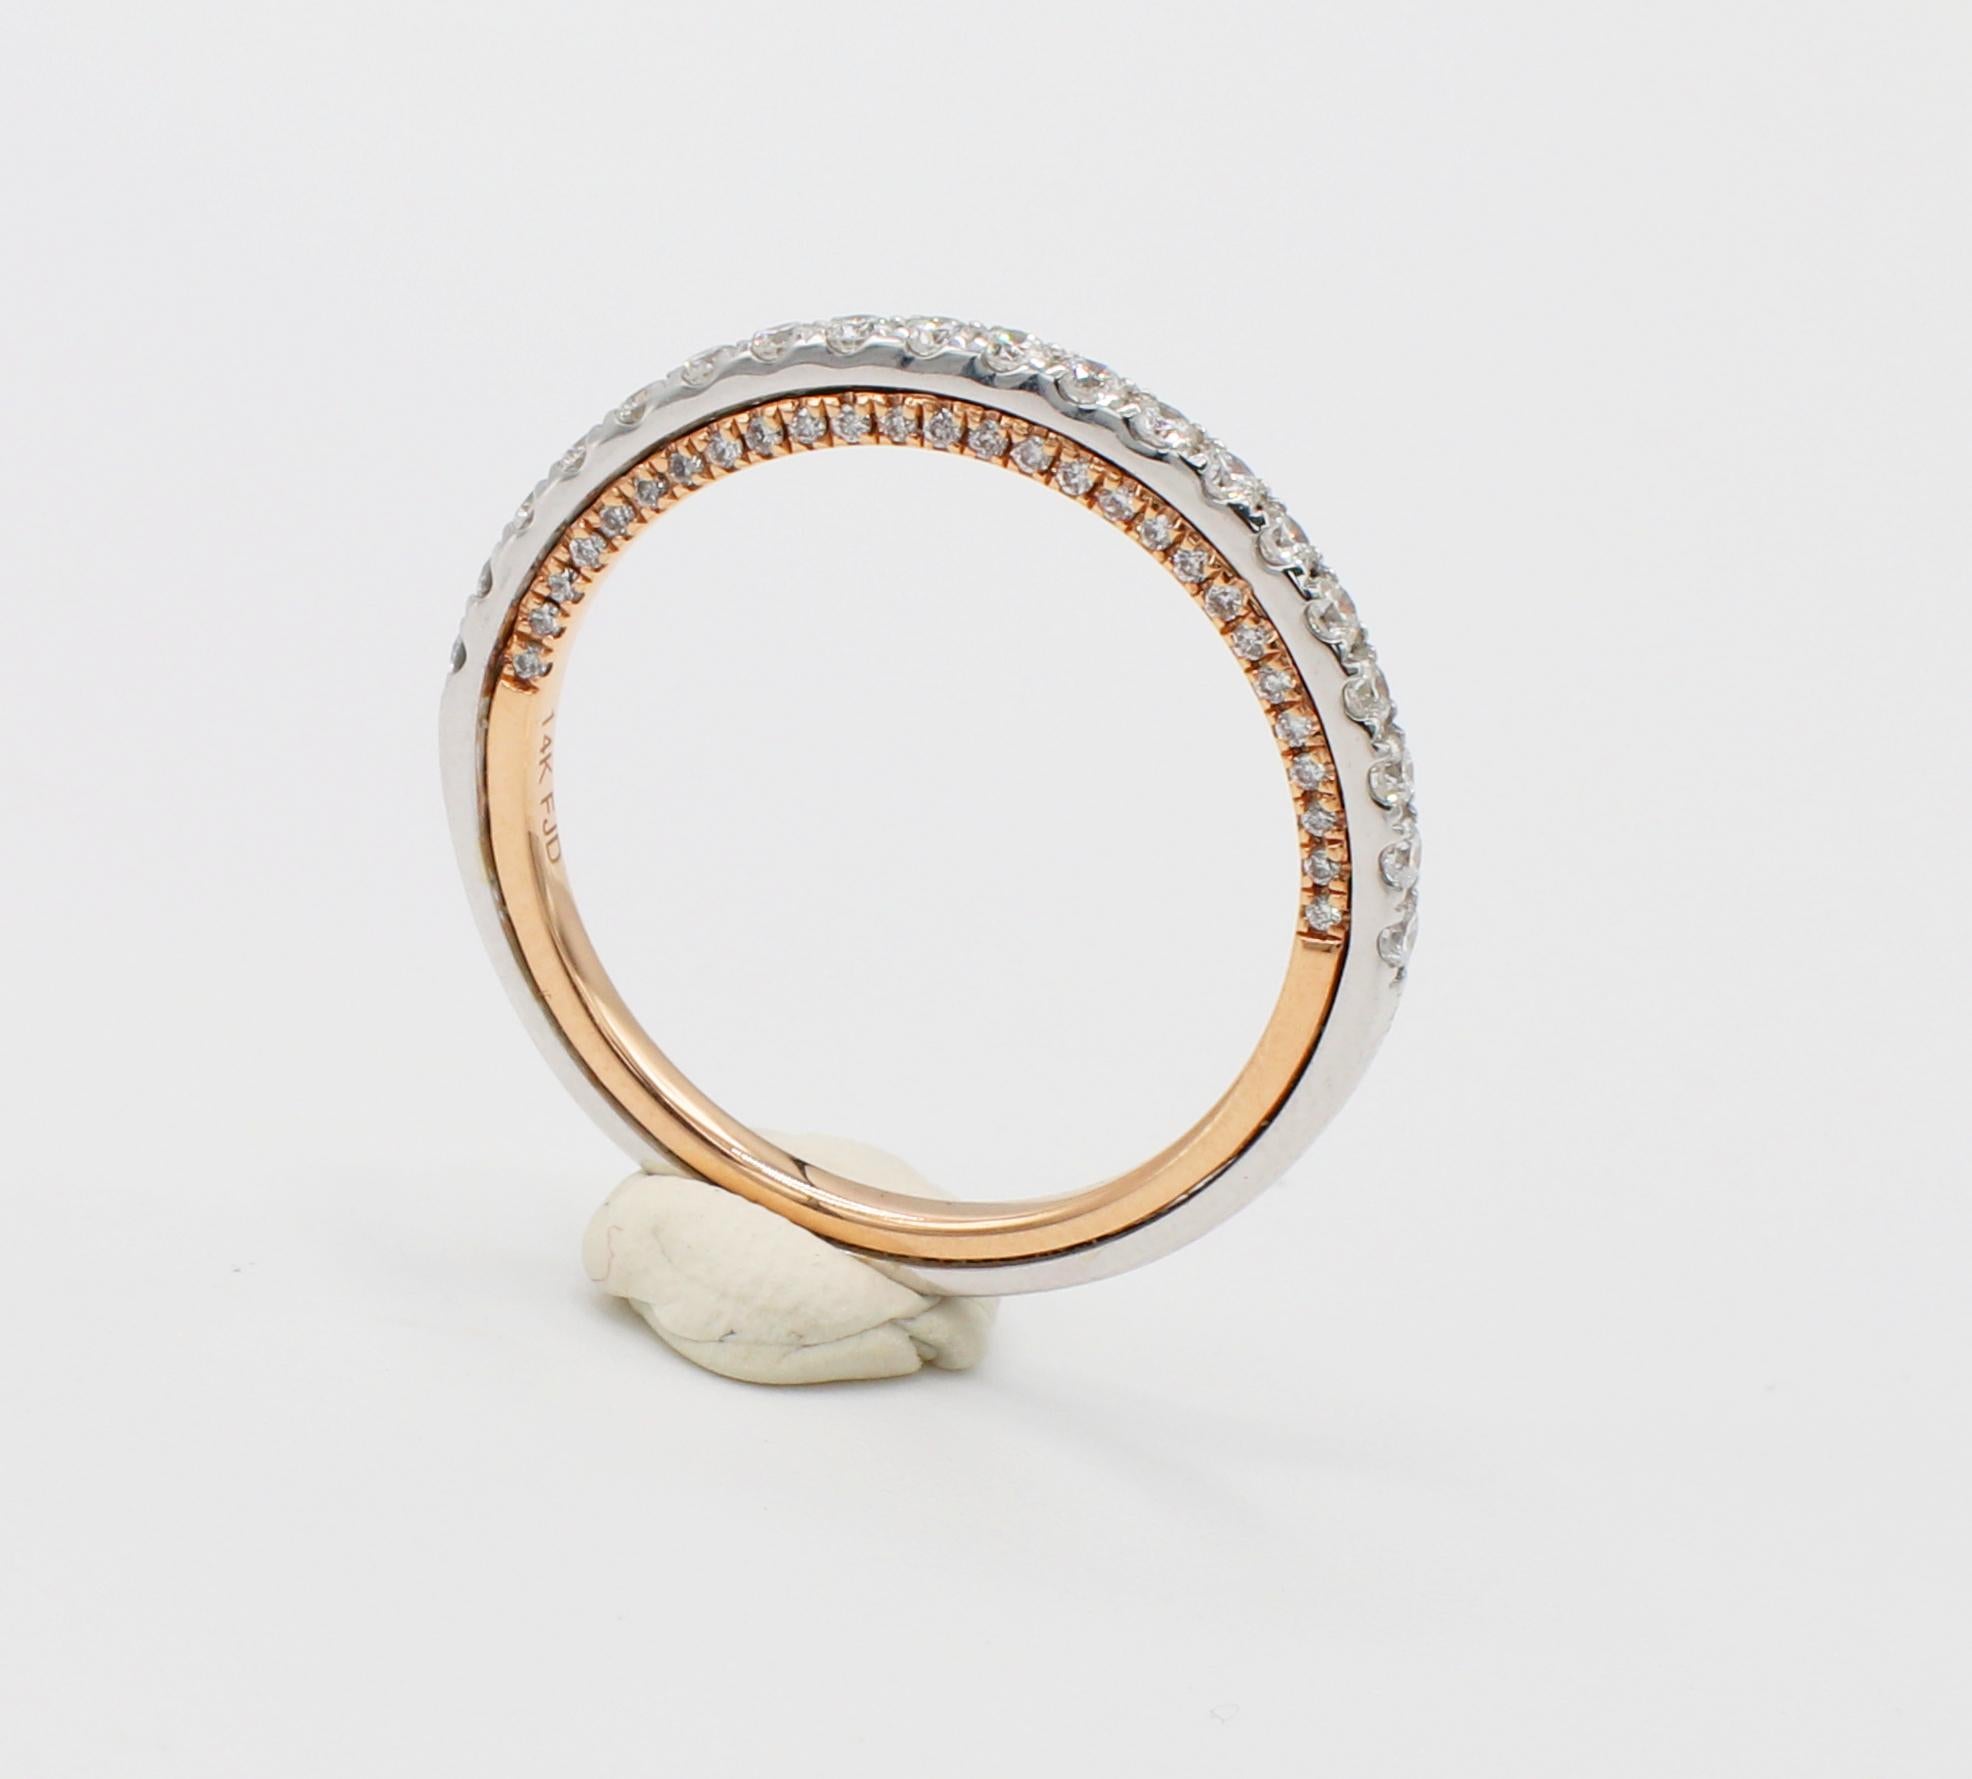 14K White & Rose Gold 0.41ctw 1.75mm Thin Round Brilliant Cut Natural Diamond Wedding Band Hidden Natural Diamonds Ring Size 6

Metal: 14k White & Rose Gold
Diamonds: 73 Round brilliant cut natural diamonds, approx .413 CTW G-H SI
Band is 1.75mm